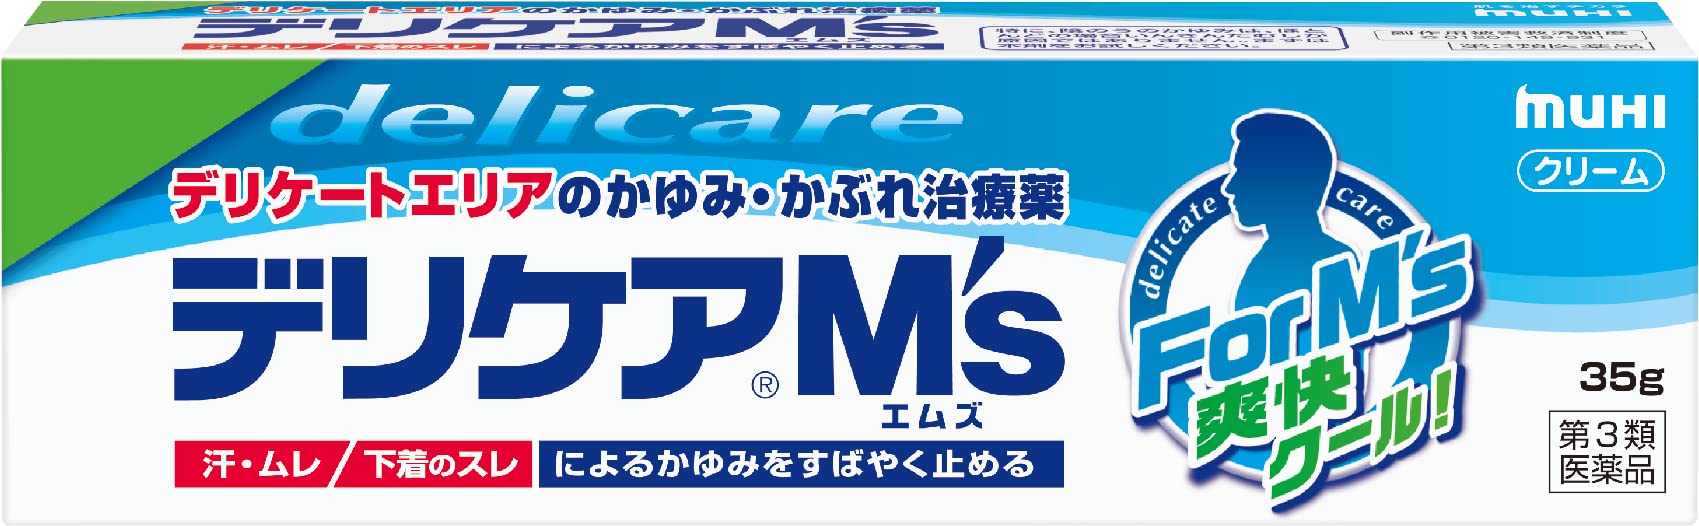 Ikeda Mohando Third Drug Class Delicare M'S 35G Japan Self-Medication Tax System